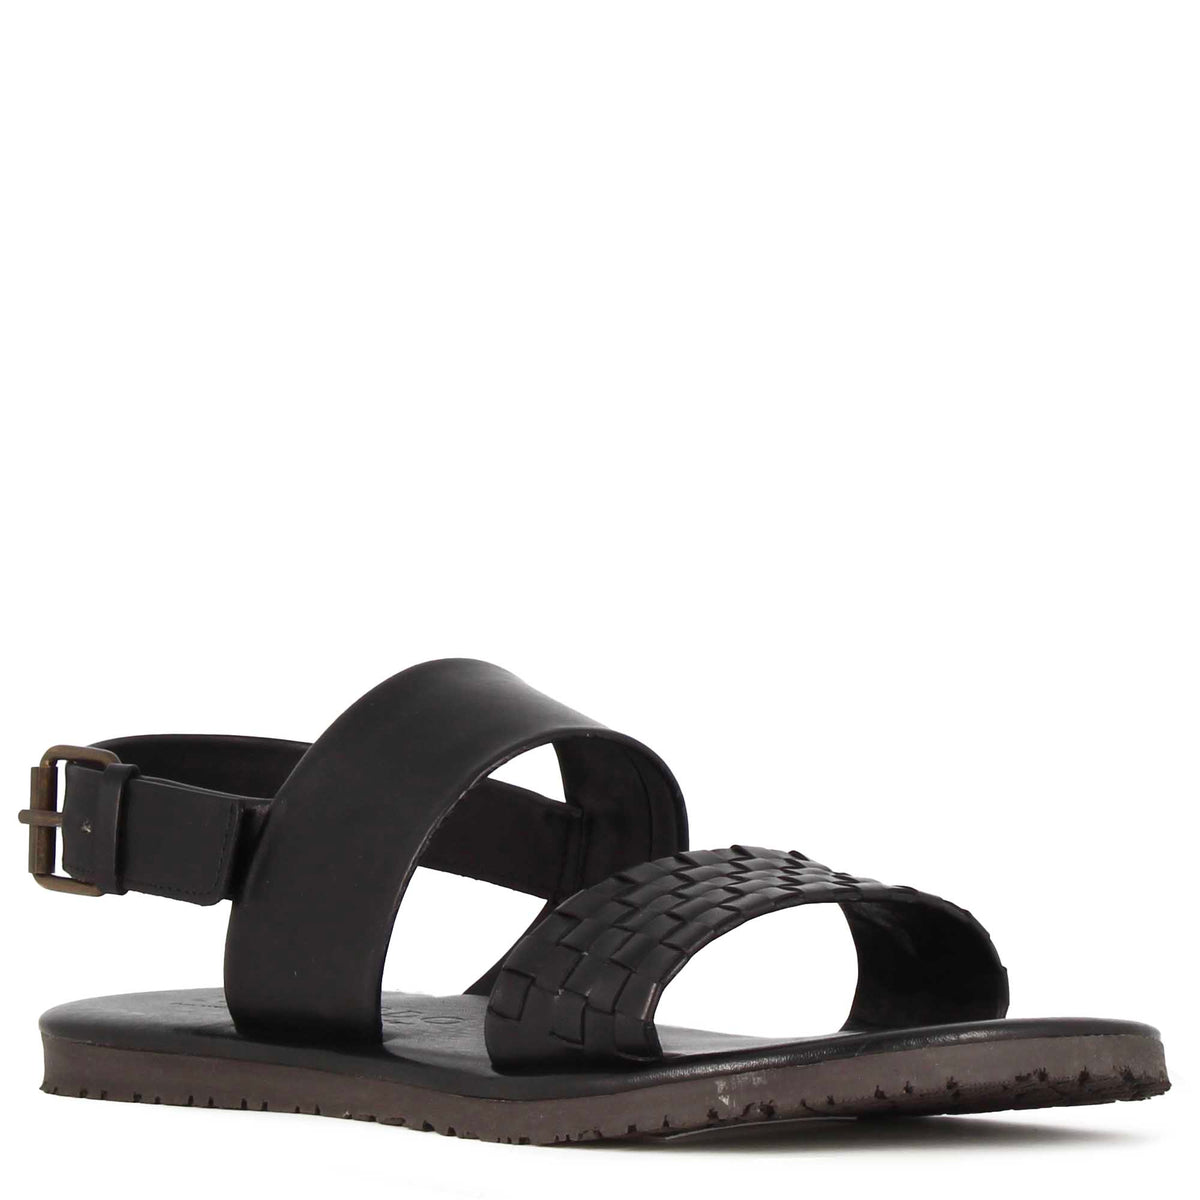 Men's sandal with buckle in black semi-braided leather